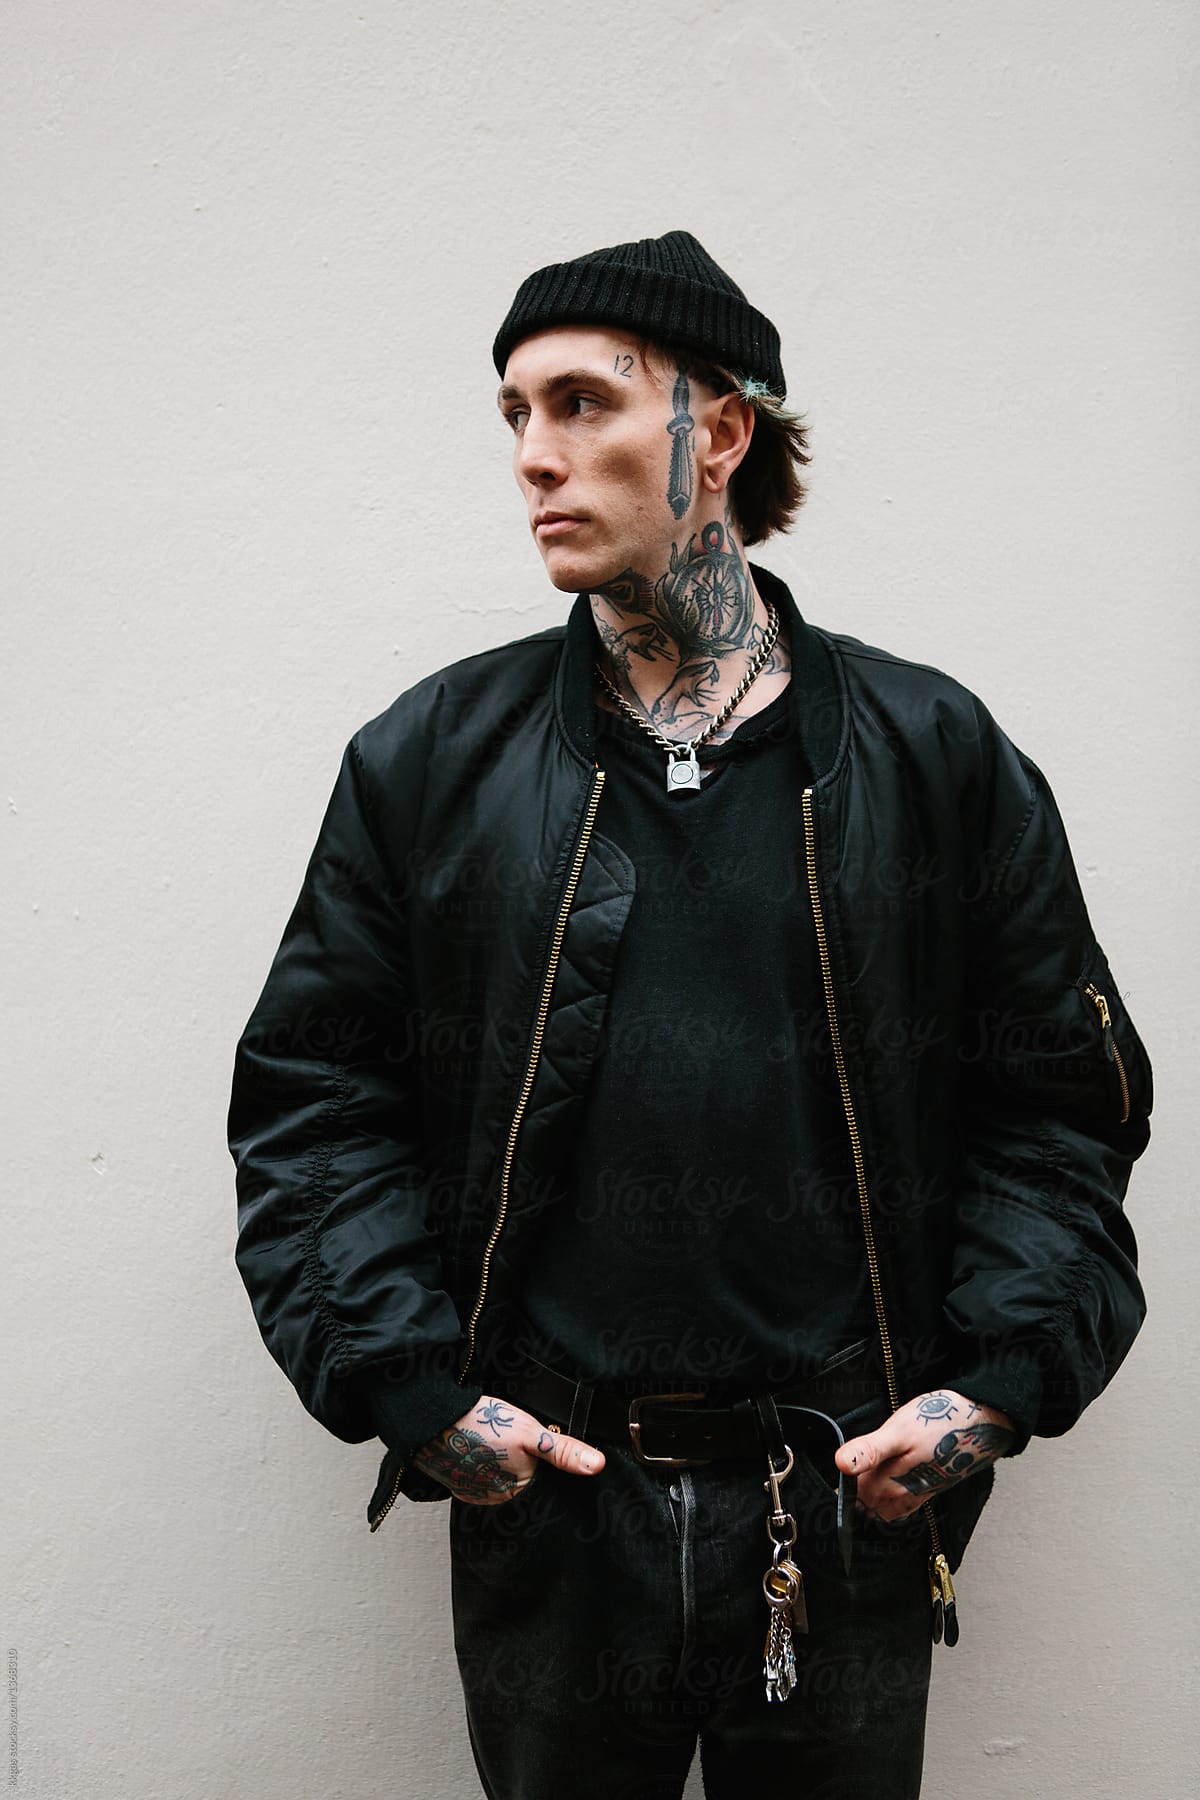 Gothic Punk Man With Tattoos by Stocksy Contributor Kkgas - Stocksy